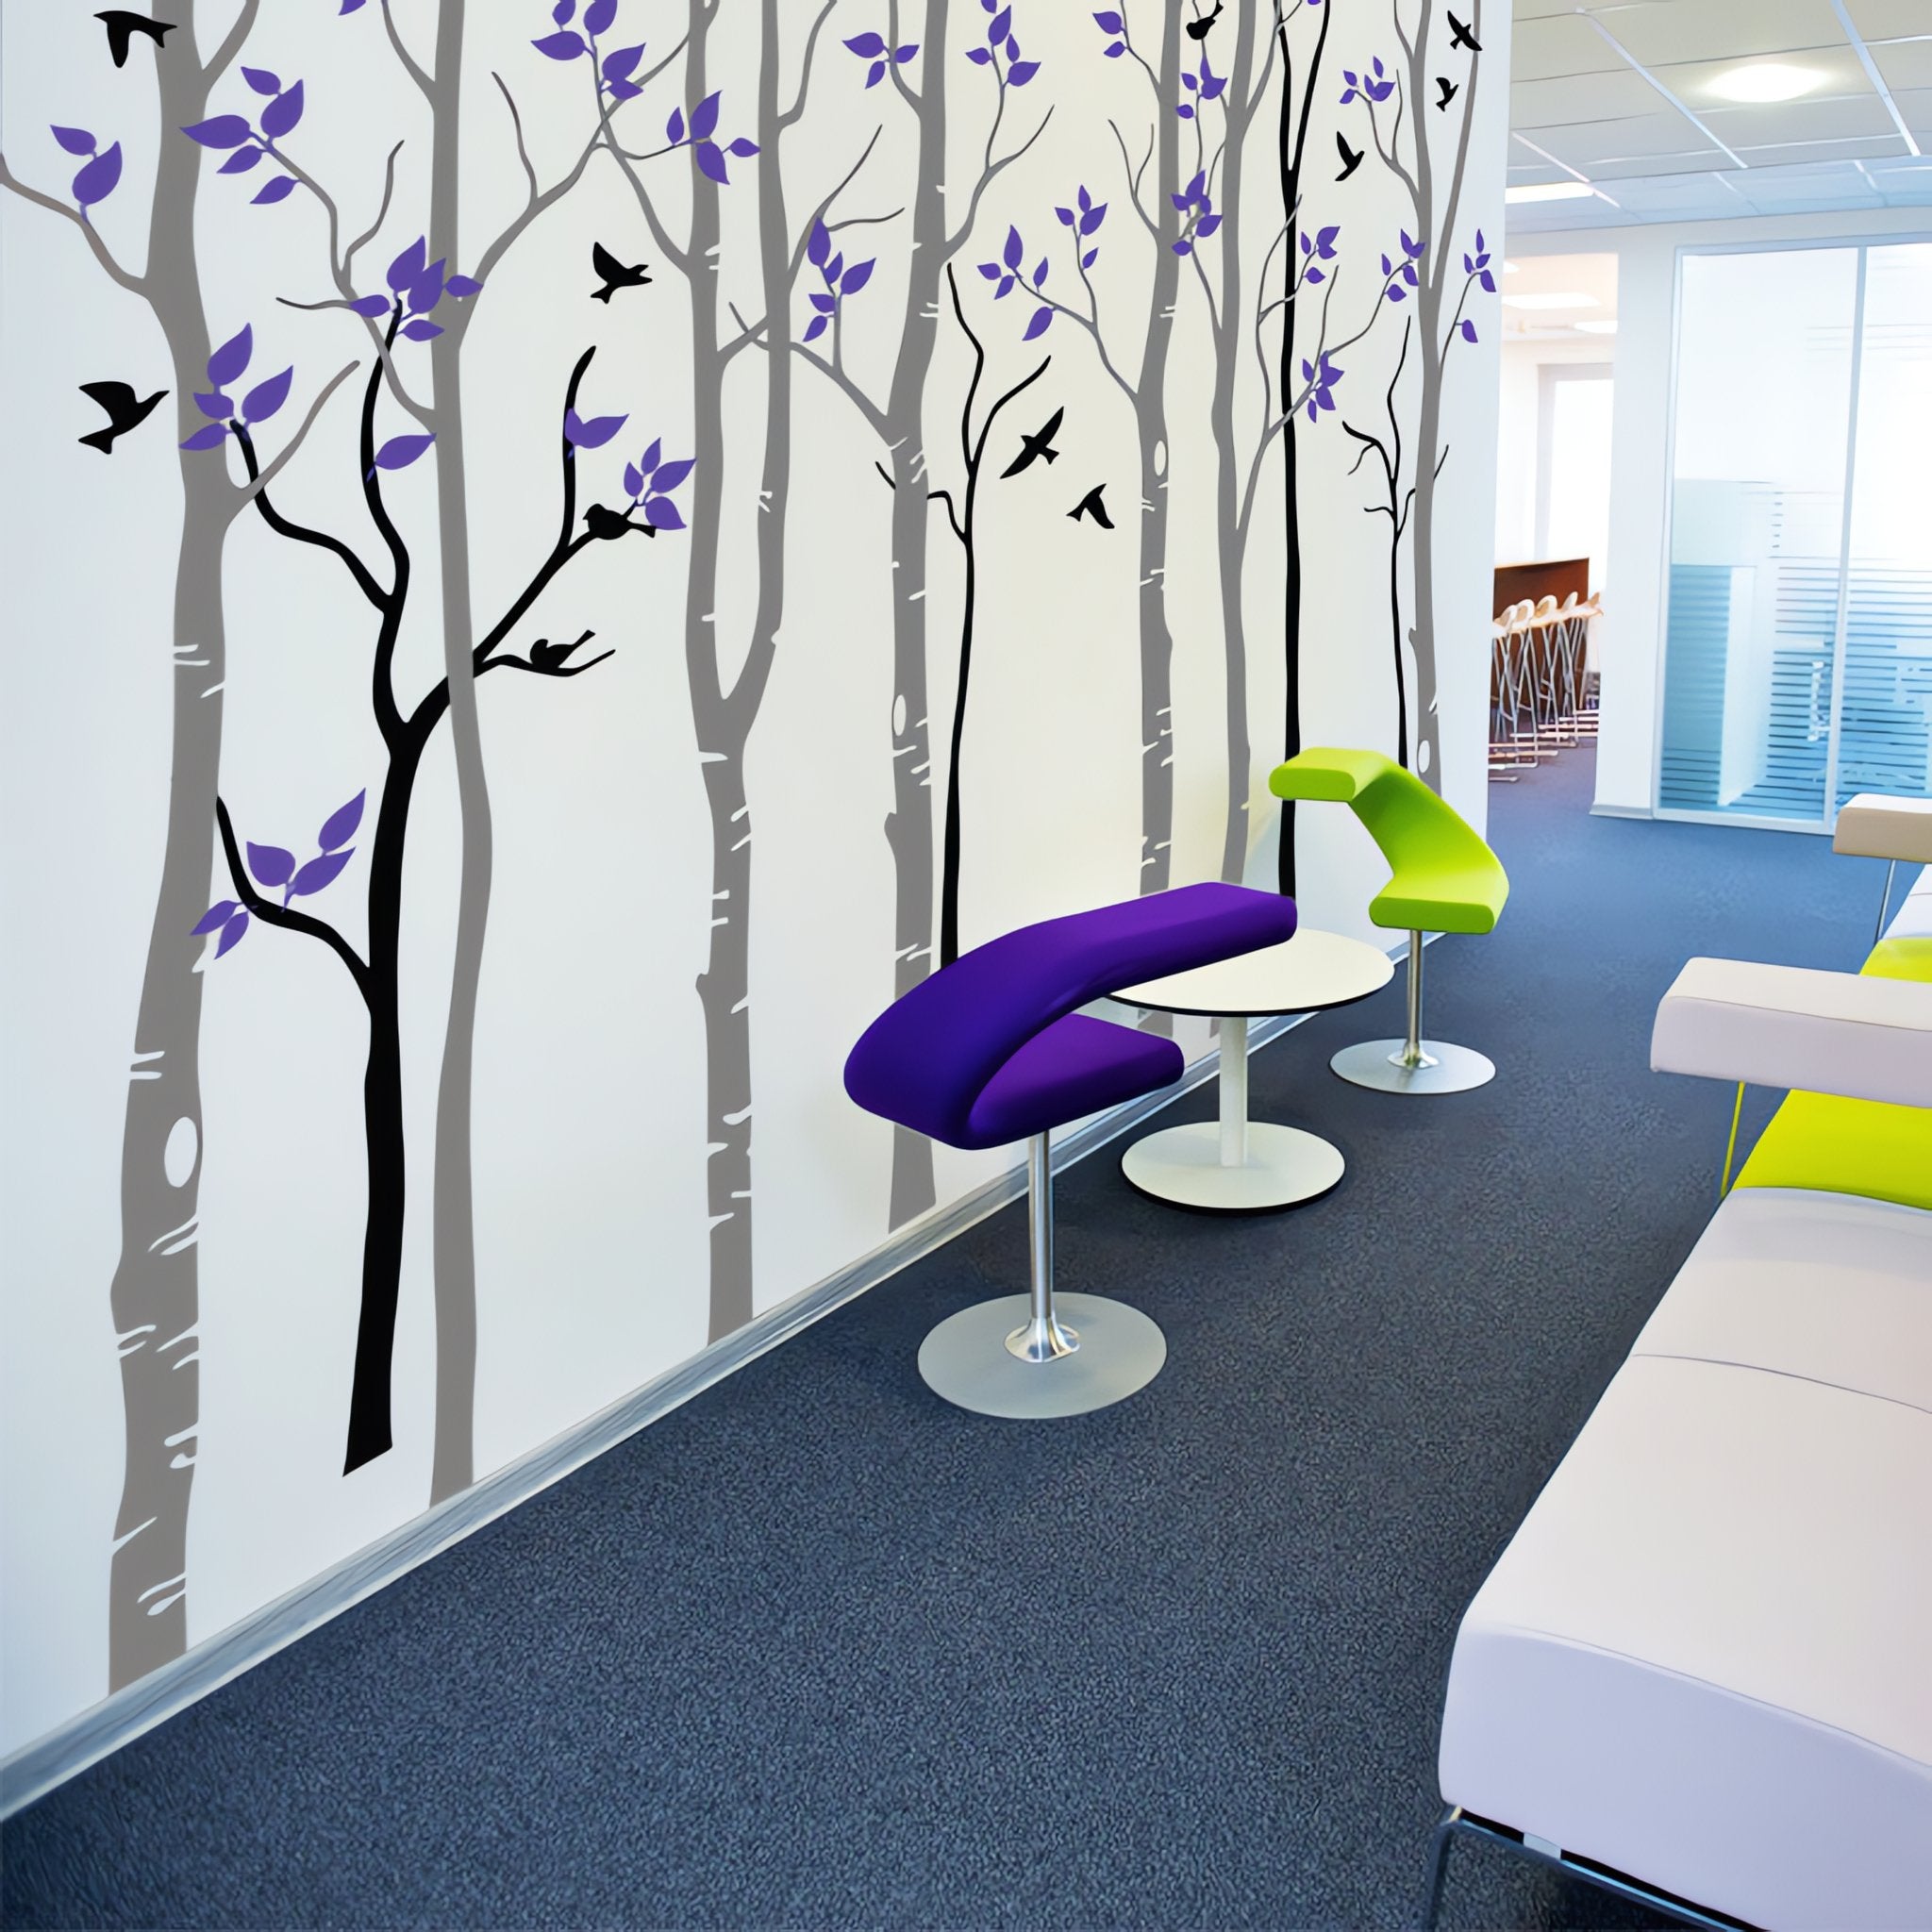 Tree wall sticker of many trees and birds in a modern room with bar stools.